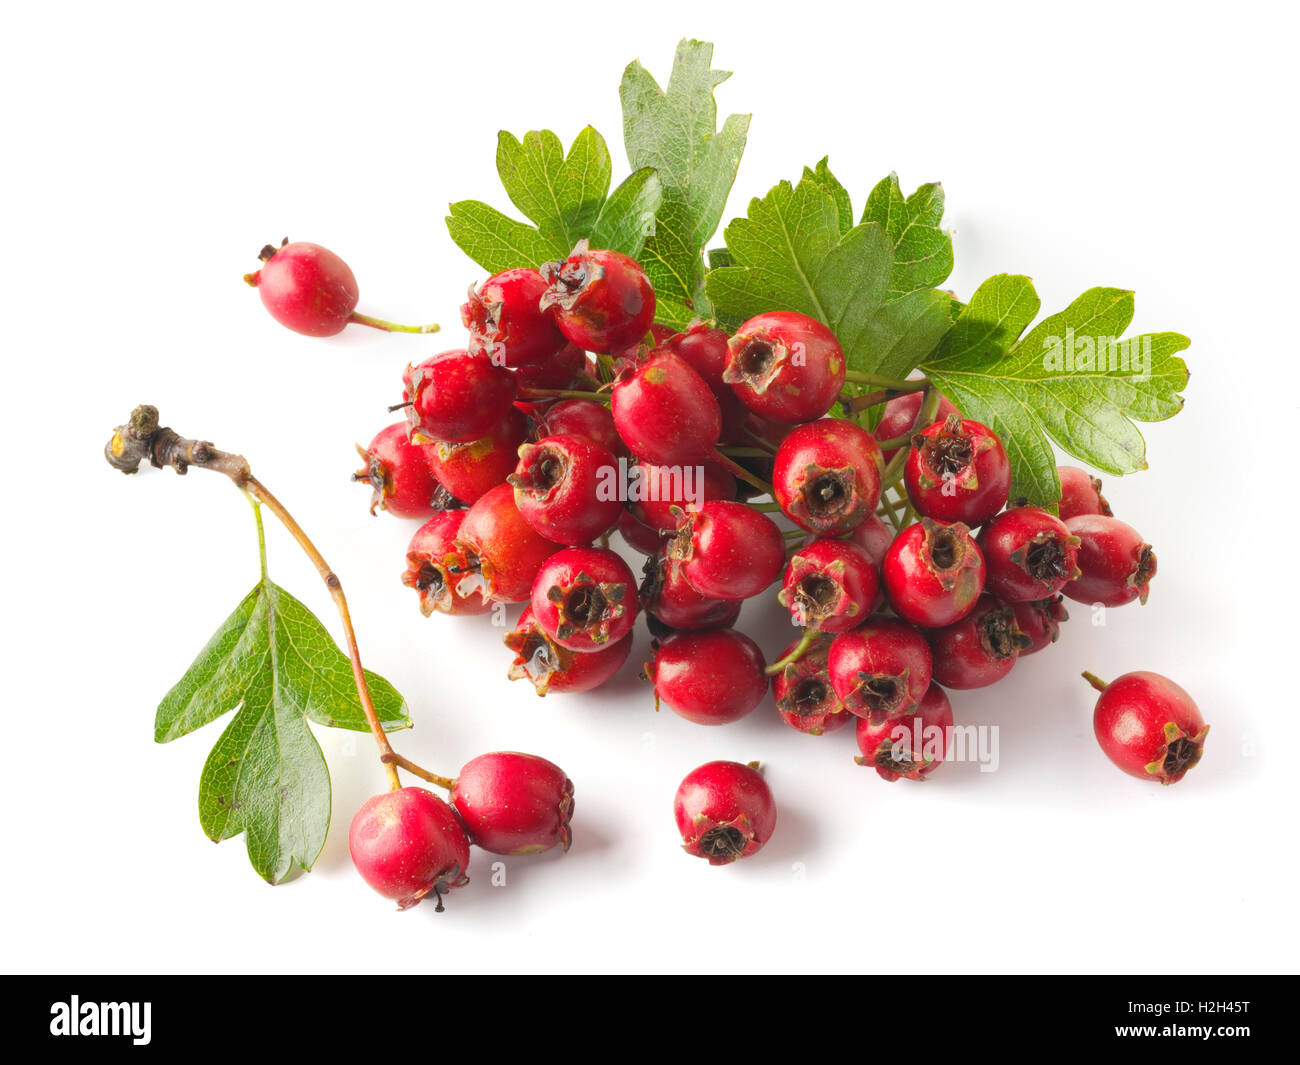 Fresh picked berries from a hawthorn, thornapple, May-tree, whitethorn, or hawberry bush (Crataegus) against white Stock Photo